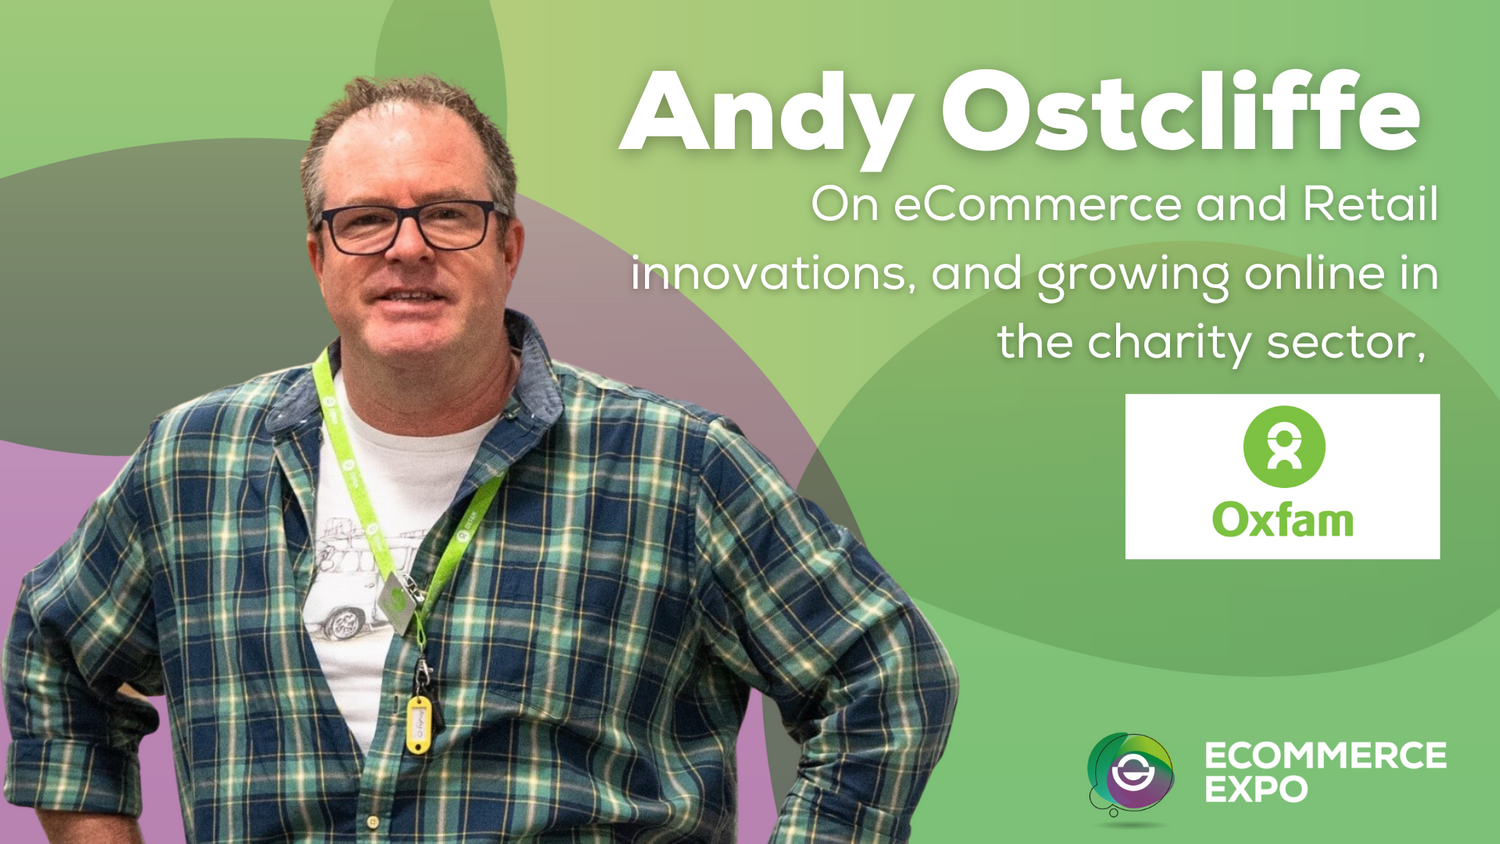 Growing Online in the Charity Sector with Andy Ostcliffe, Head of eCommerce and Retail Innovation at Oxfam